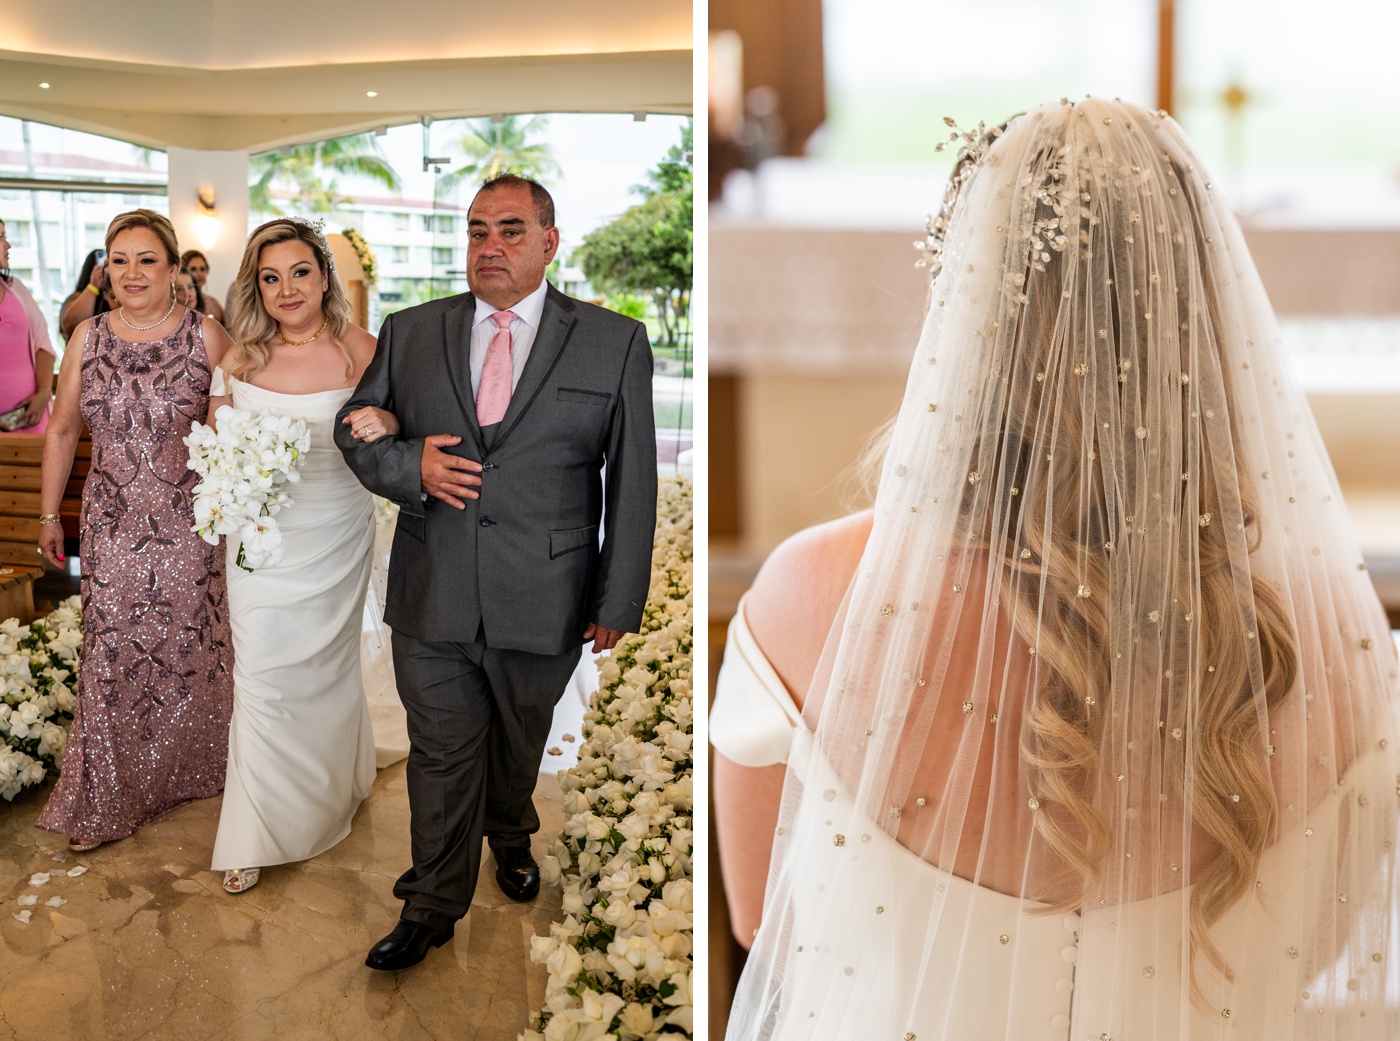 Bride wearing a pearl and crystal studded veil at her wedding ceremony in Cancùn